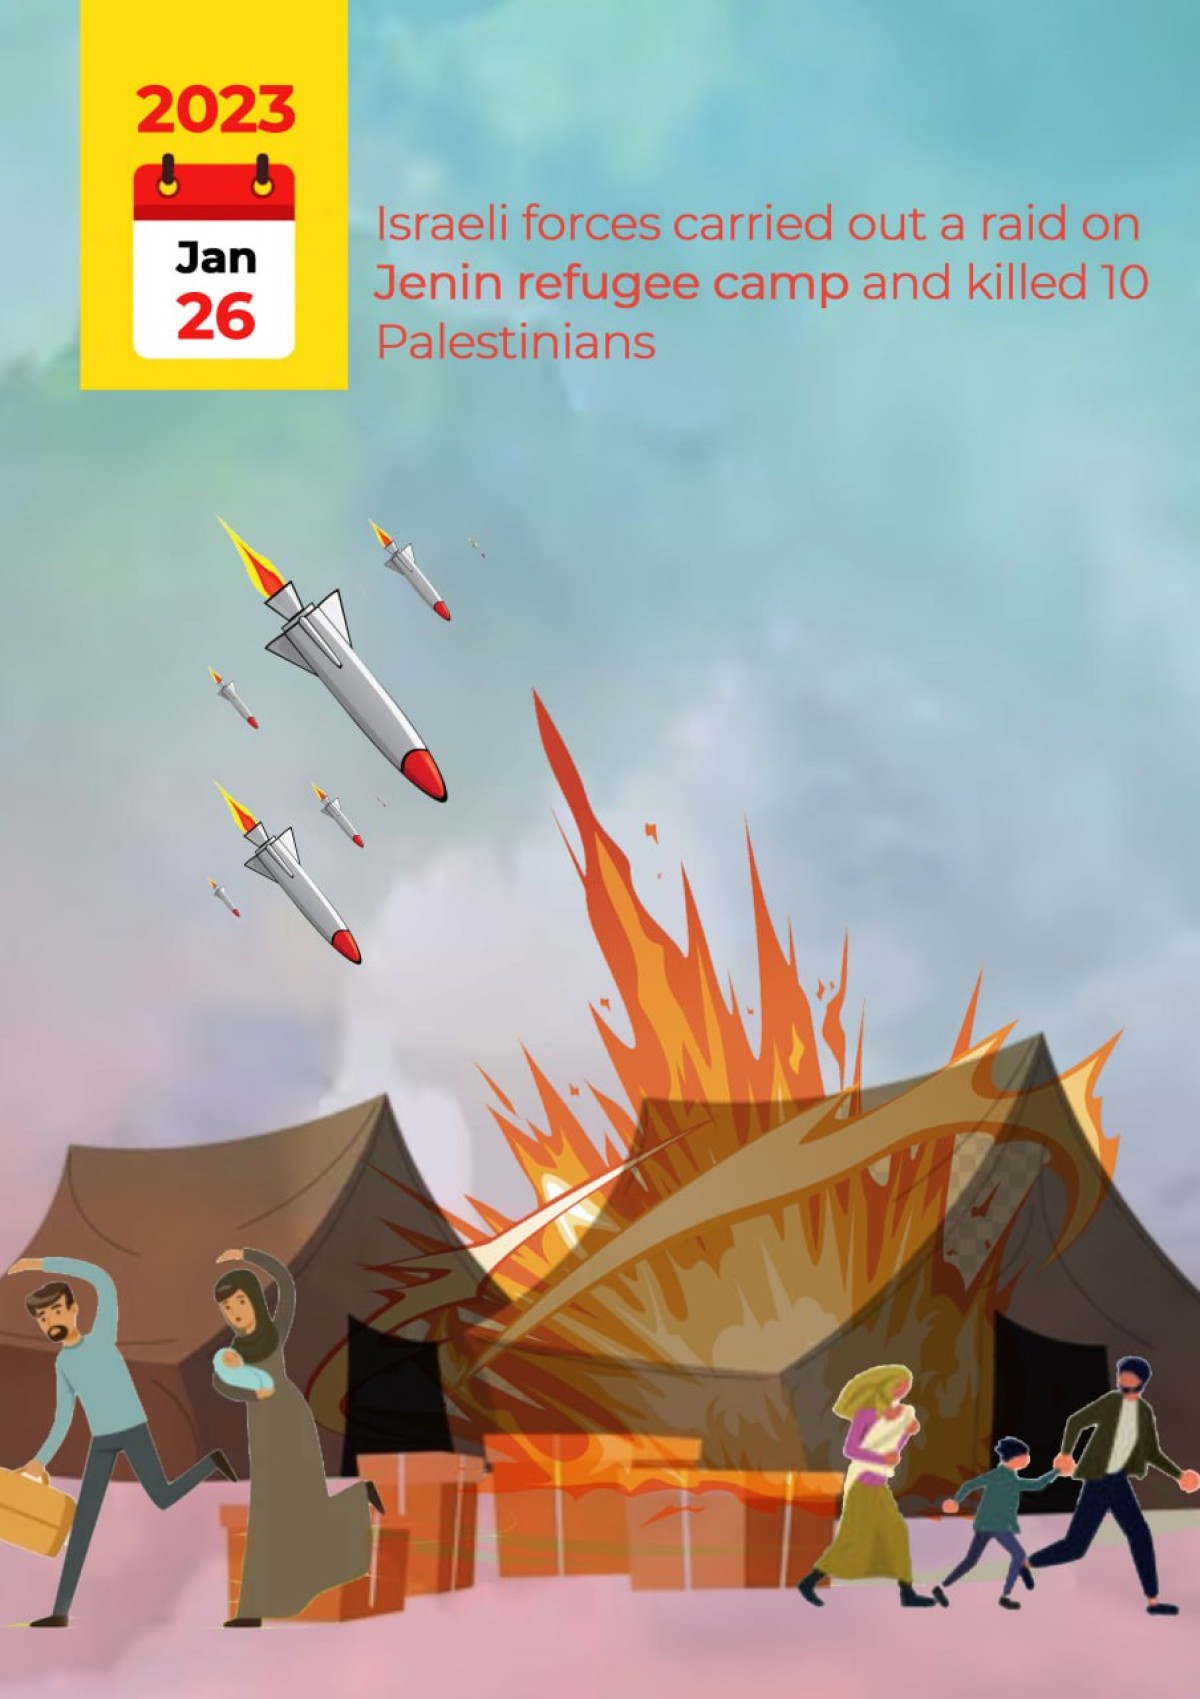 2023 Jan 26 Israeli forces carried out a raid on Jenin refugee camp and killed 10 Palestinians